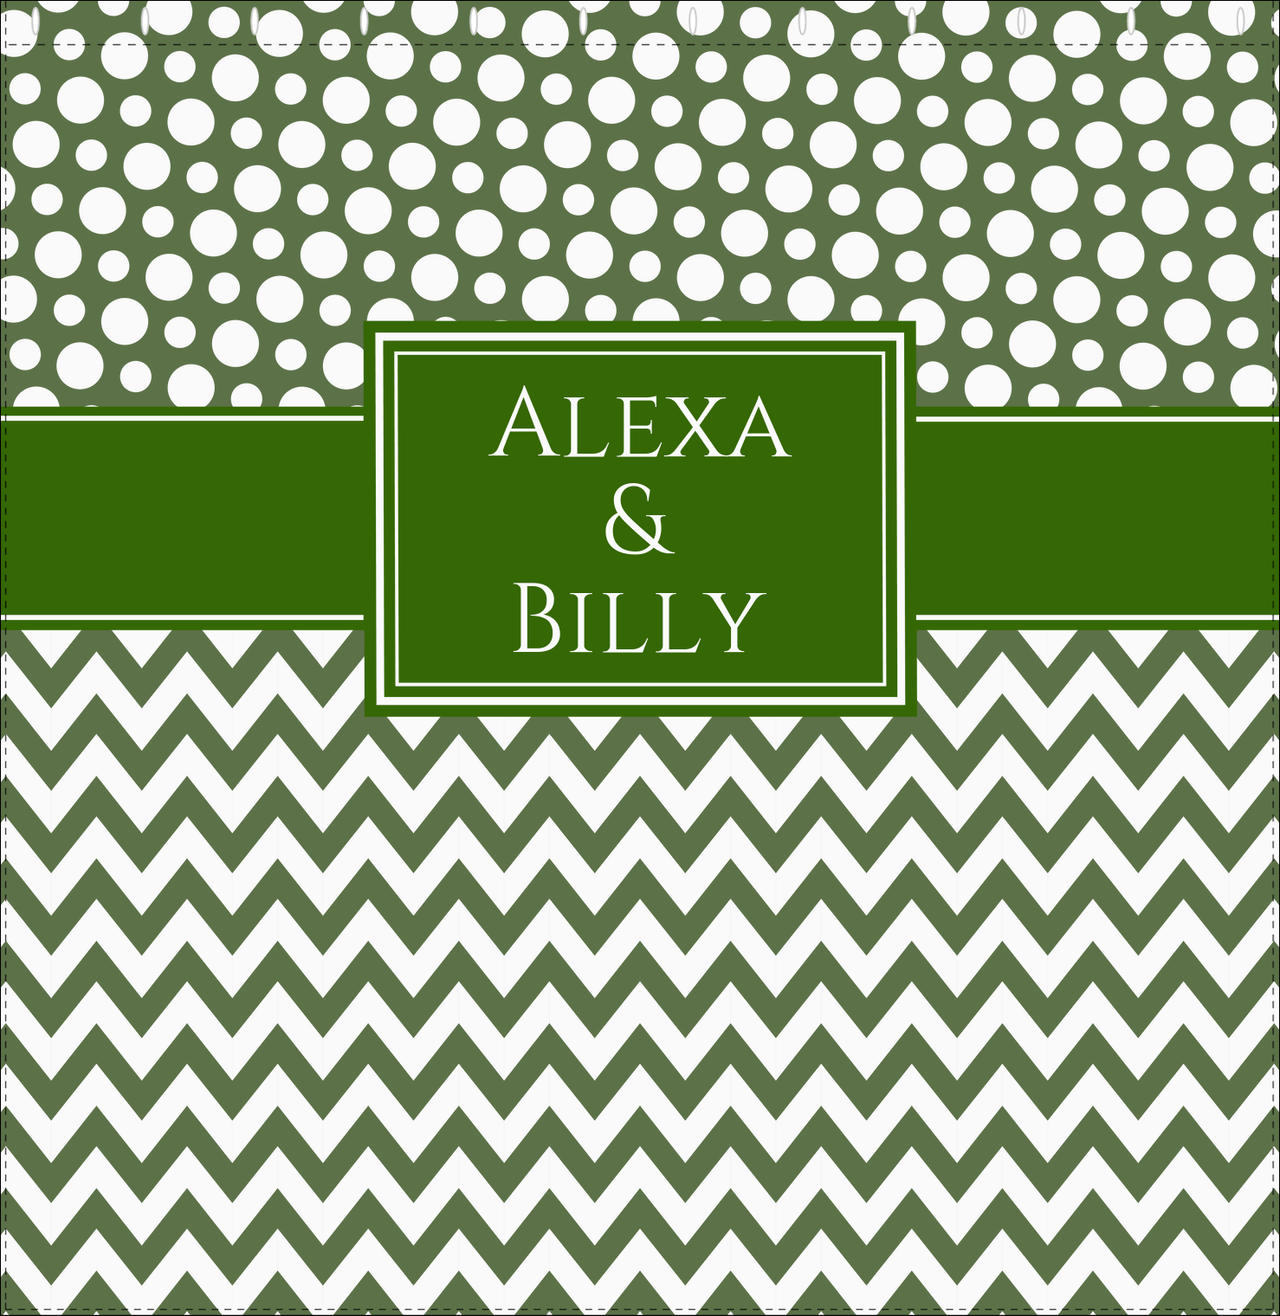 Personalized Polka Dots and Chevron III Shower Curtain - Green and White - Rectangle Nameplate - Decorate View